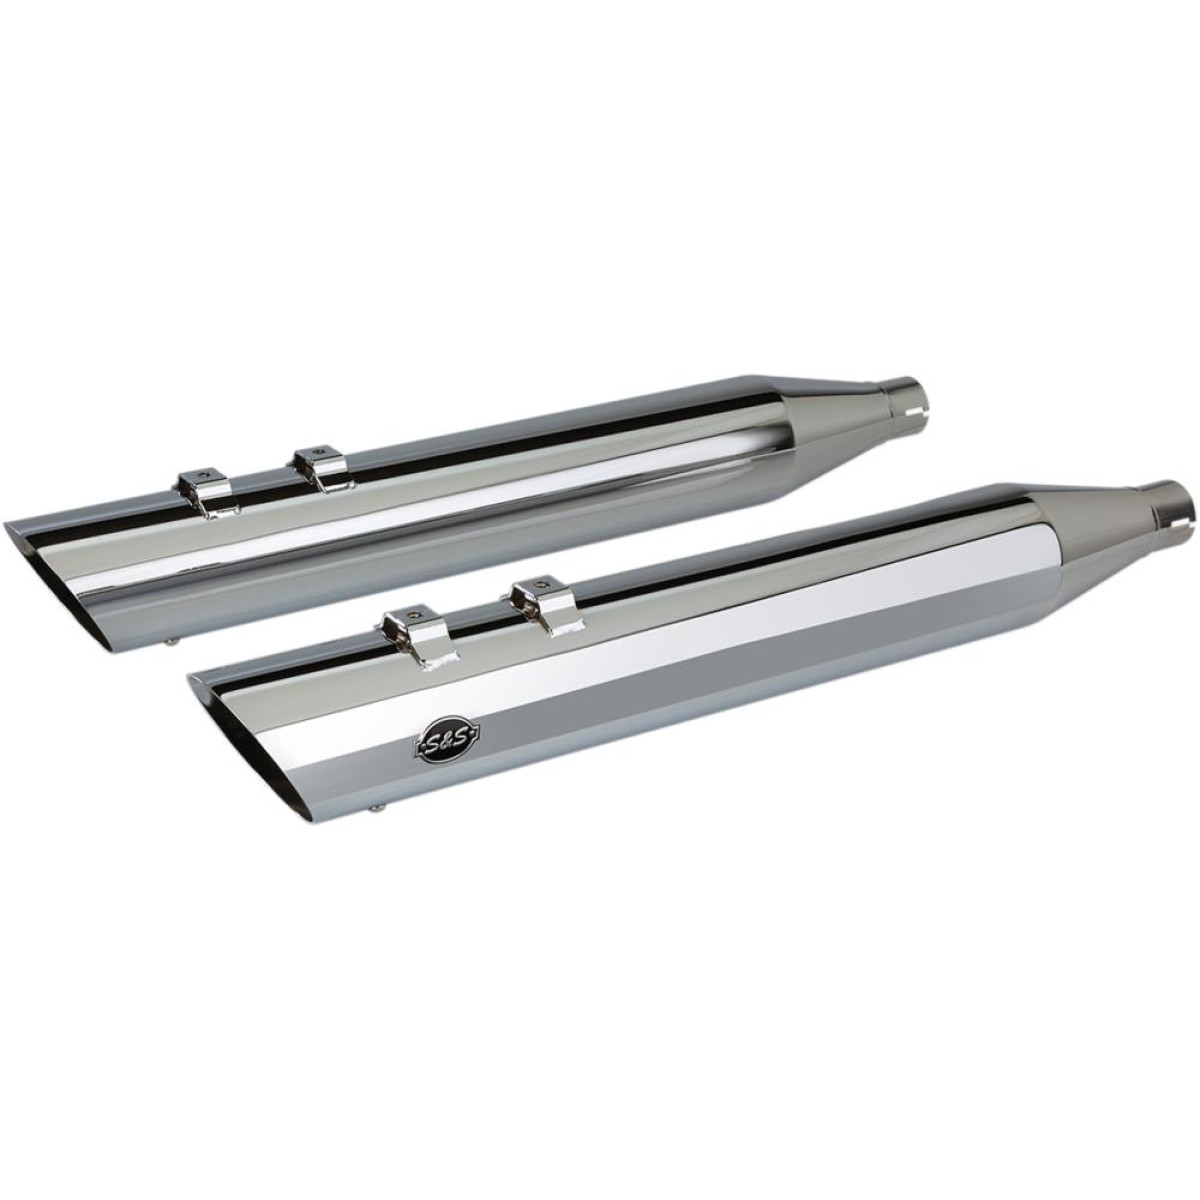 S&S CYCLE Exhaust MUFFER SLIP-ON SLASH CUT END 4" TOURING CHROME - 17-18 HD Touring Models